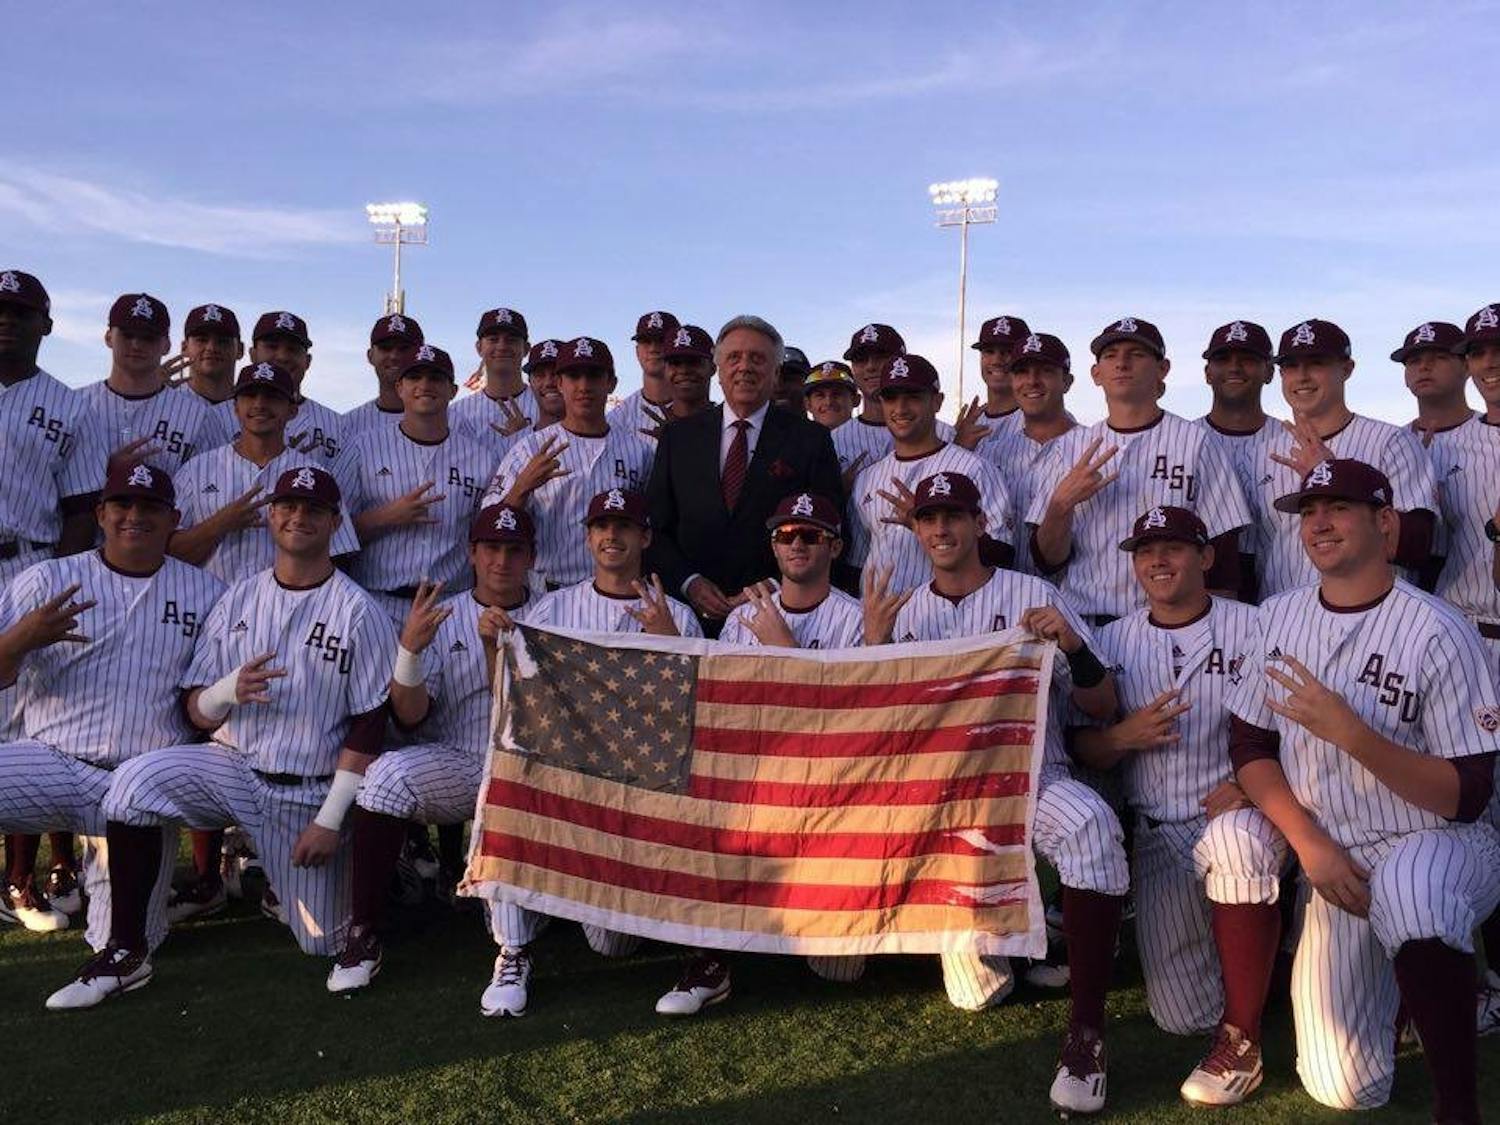 Rick Monday, middle, poses with the ASU baseball team before a game against Arizona on Tuesday, April 26, 2016 at Phoenix Municipal Stadium in Tempe, Arizona. The team was honoring&nbsp;Monday, an ASU alumnus, for the 40-year anniversary of him&nbsp;saving a flag that was being burnt in protest at Dodger Stadium.